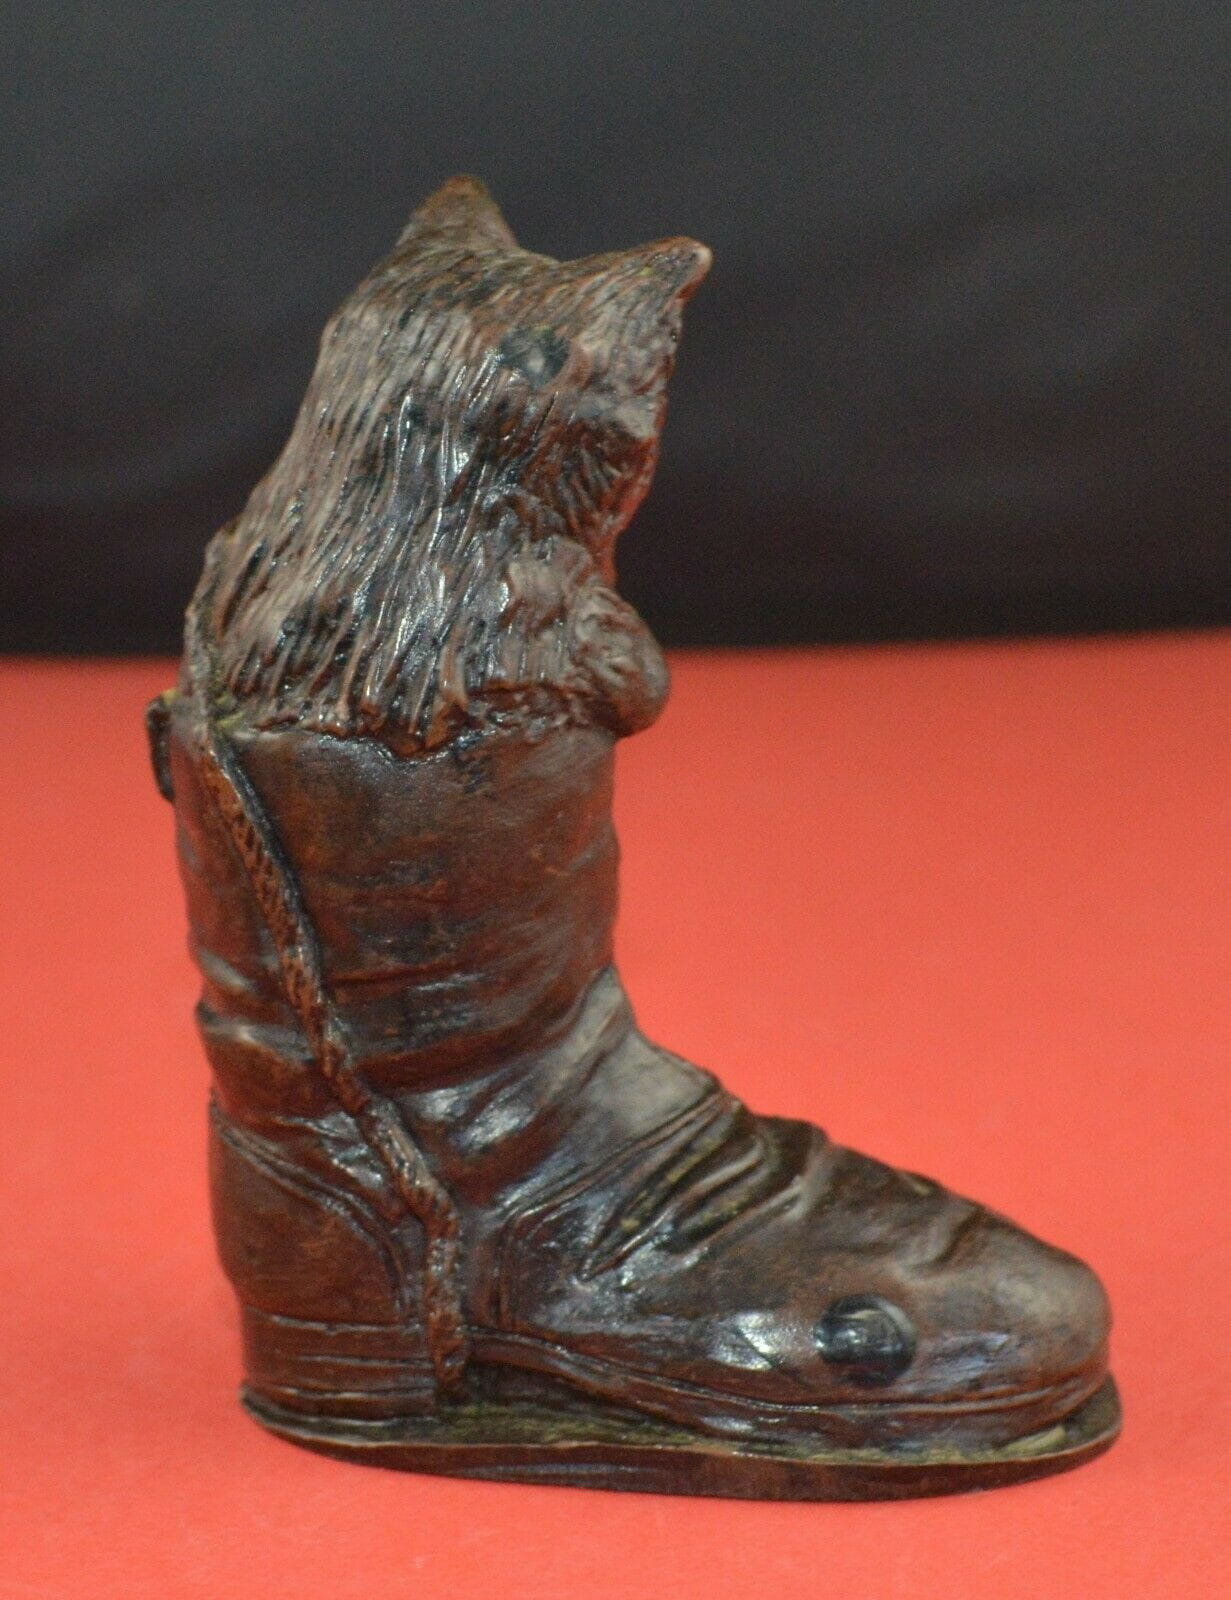 COLLECTOR BOOT BROWN CAT IN BOOT(PREVIOUSLY OWNED)GOOD CONDITION - TMD167207